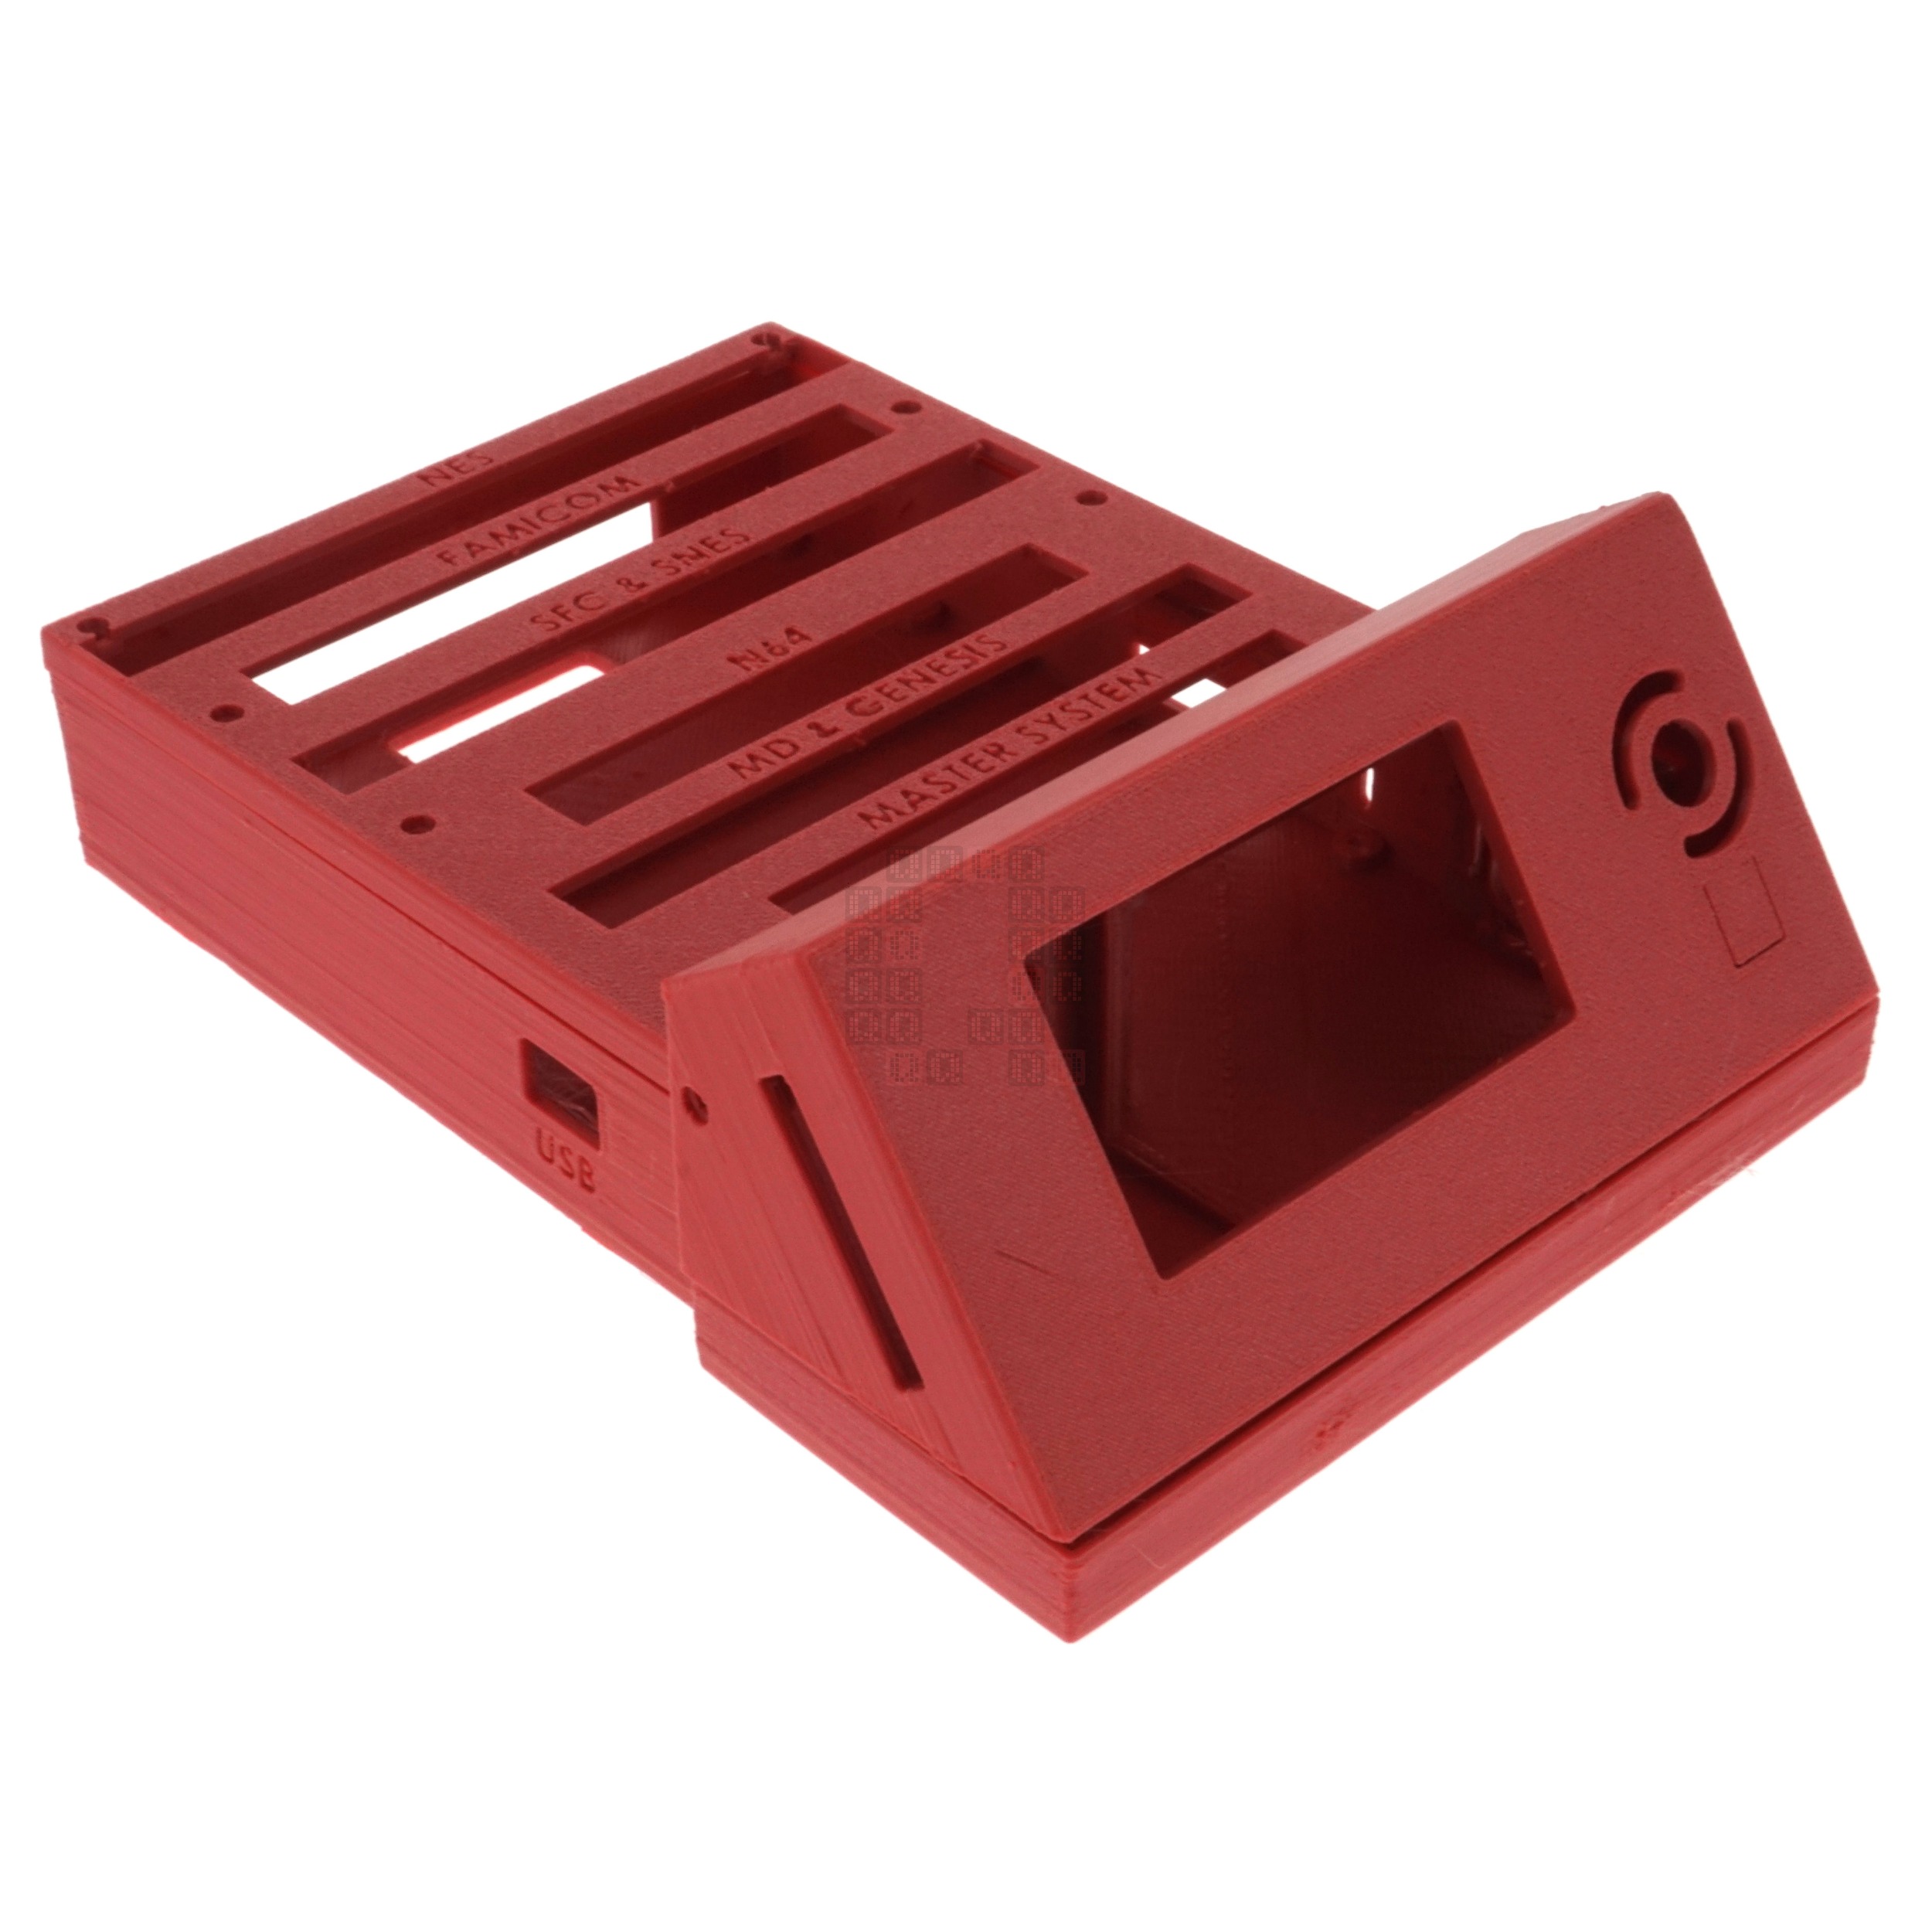 Sanni Open Source Cart Reader HW5 Fully Enclosed Shell Housing, Red